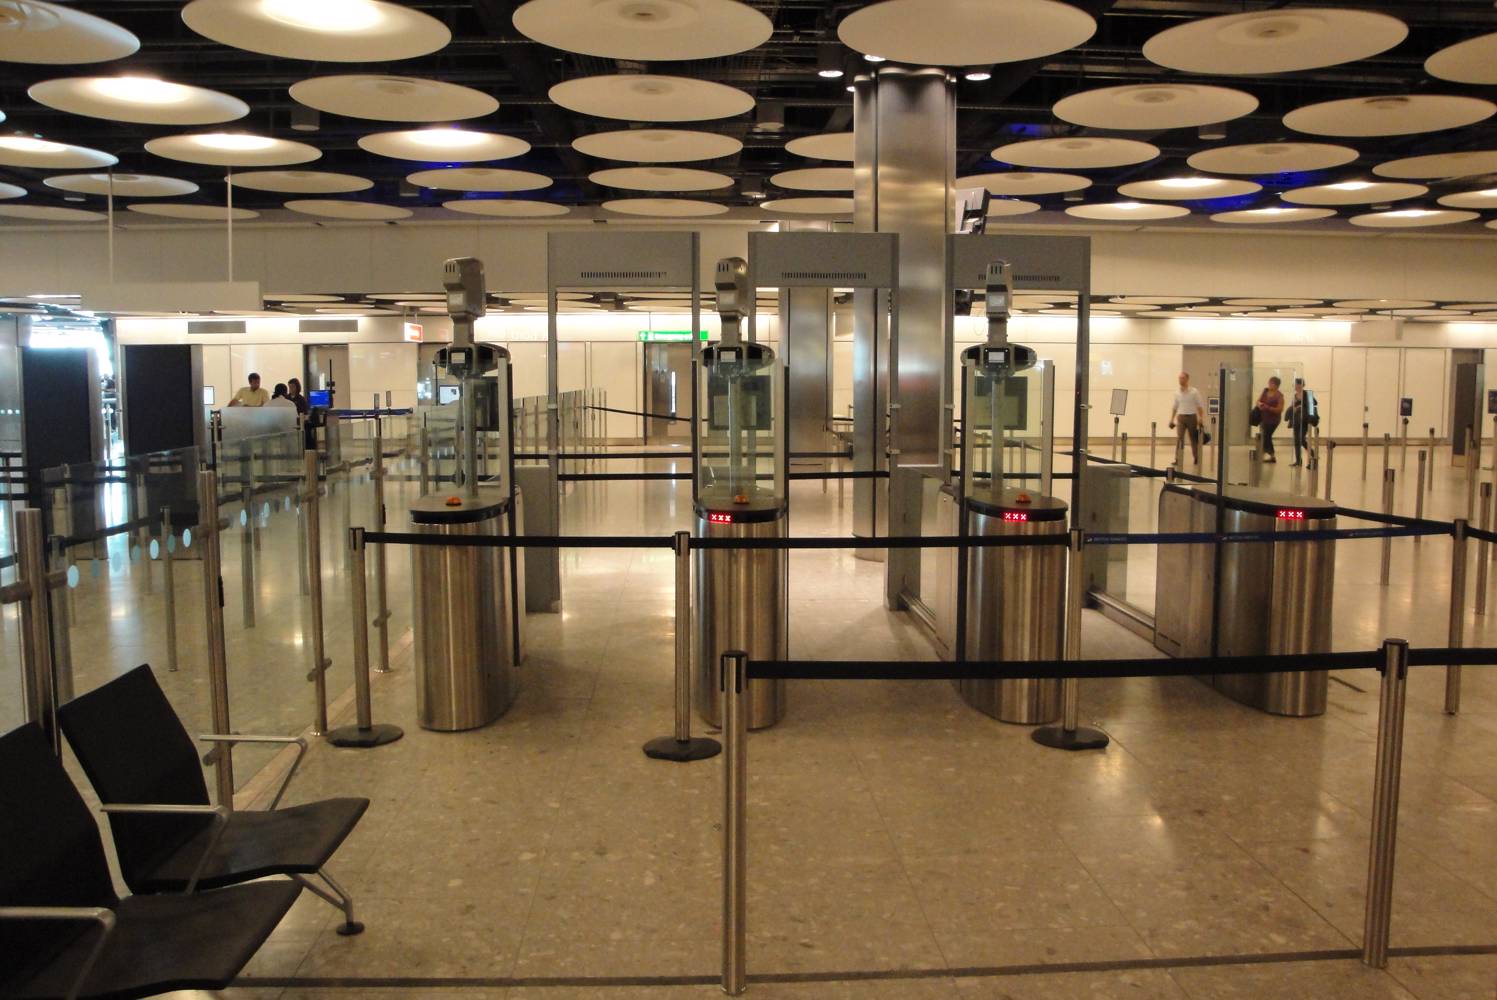 ePassport gates in Heathrow Airport. Photo: Home Office / CC BY 2.0